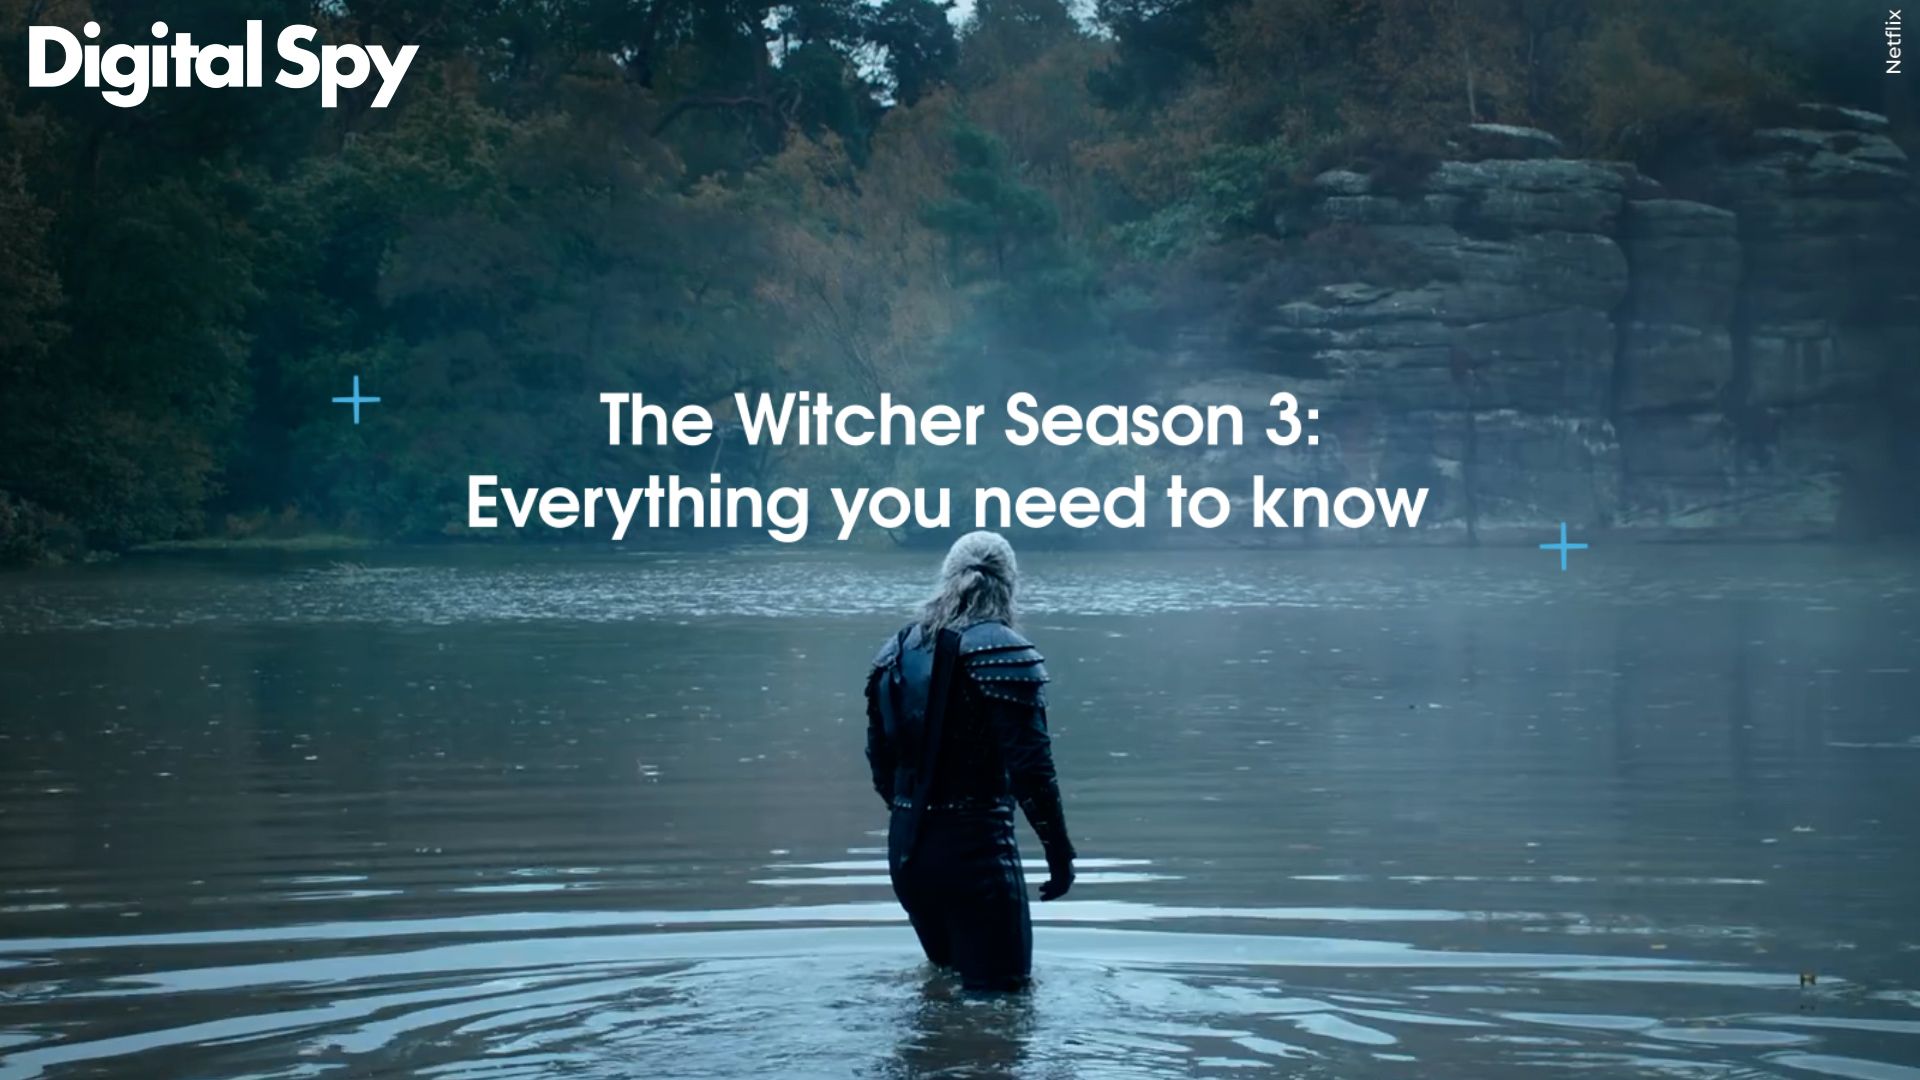 The Witcher season 3 is when everything changes